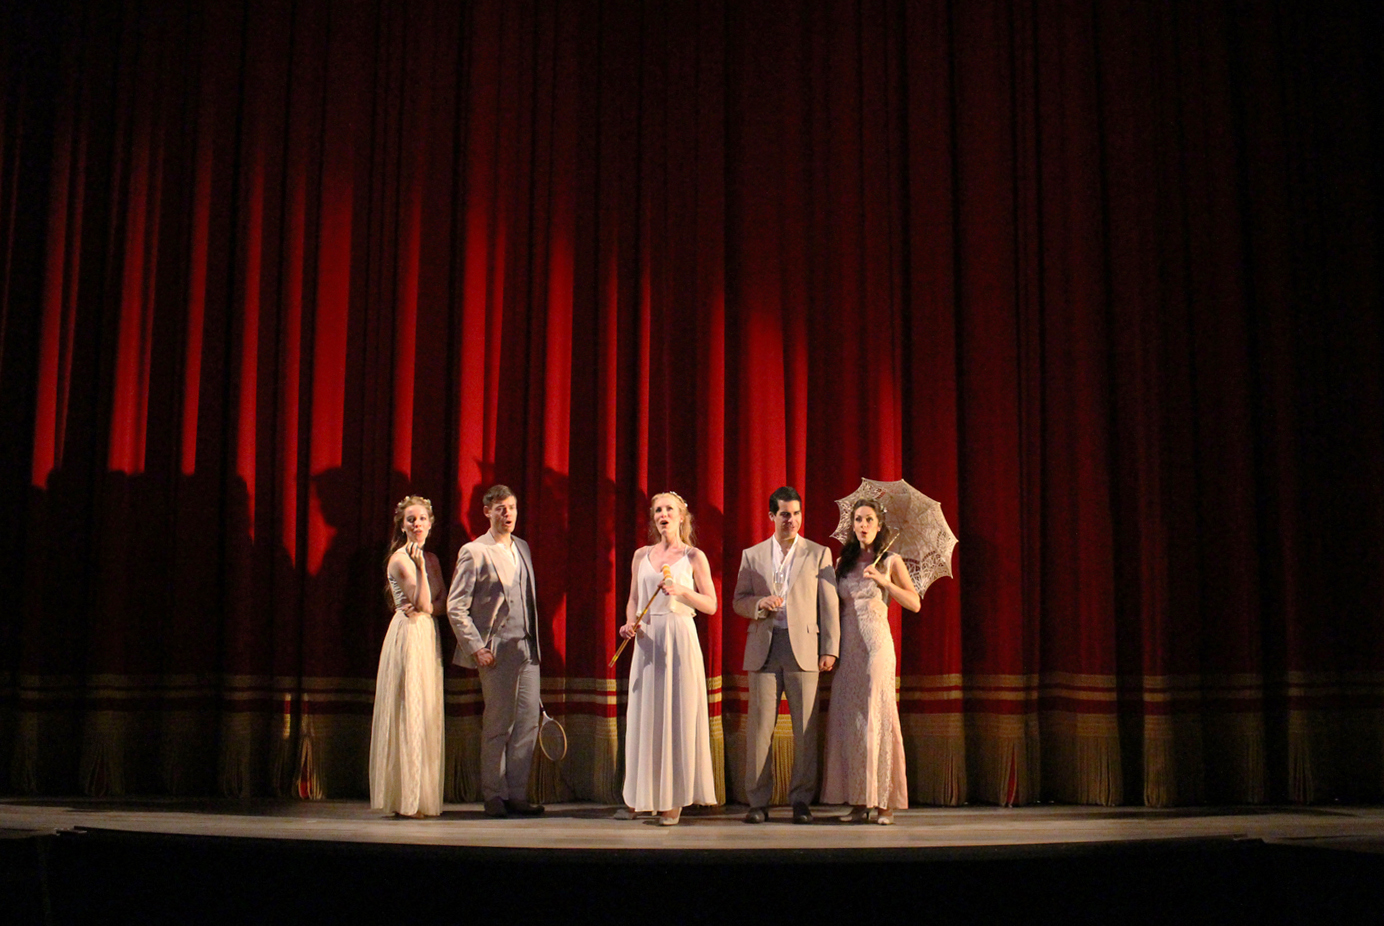 Act II also begins with Liebeslieder singers in front of red curtain